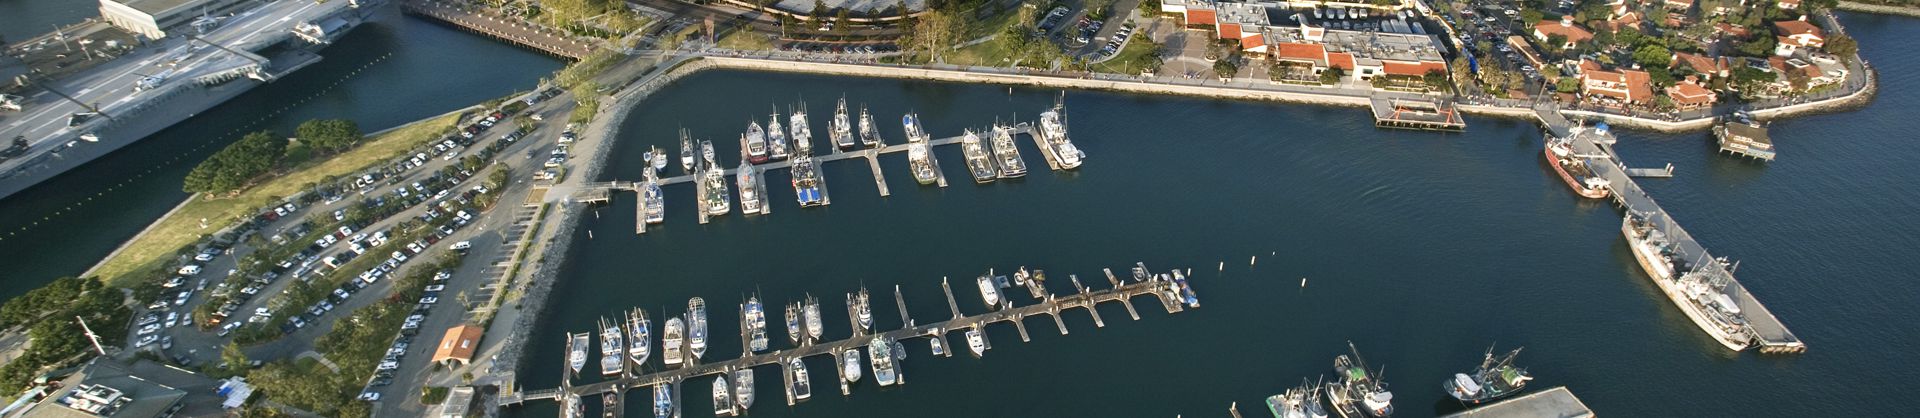 San Diego Port with Boats